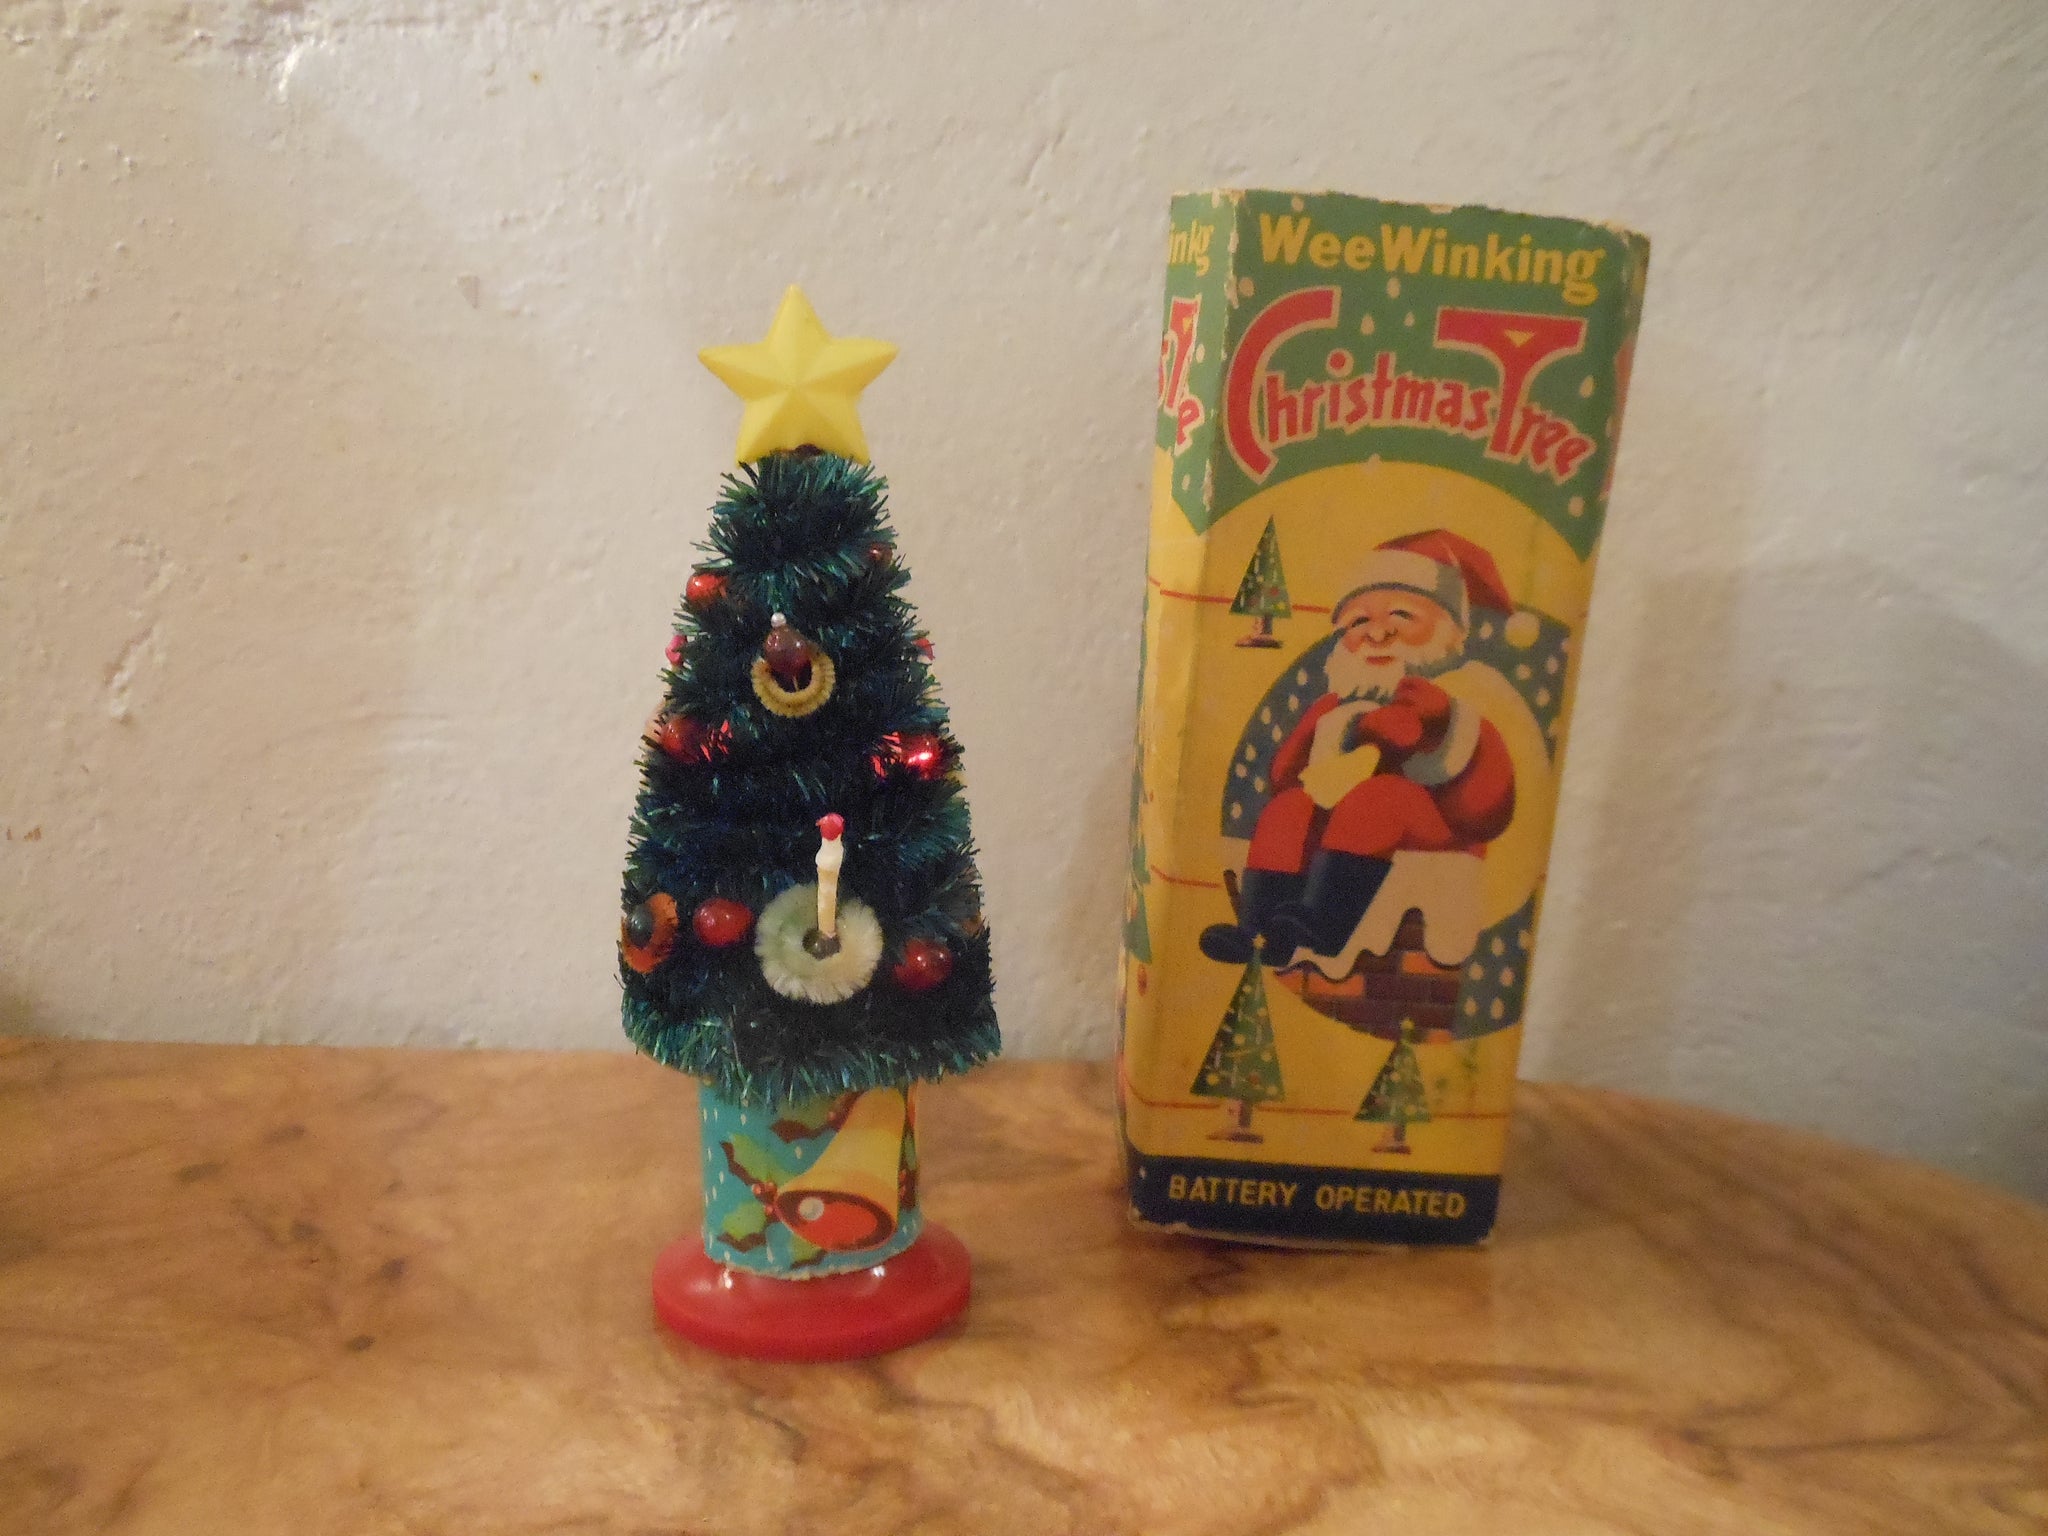 1940s Wee Winking Christmas Tree